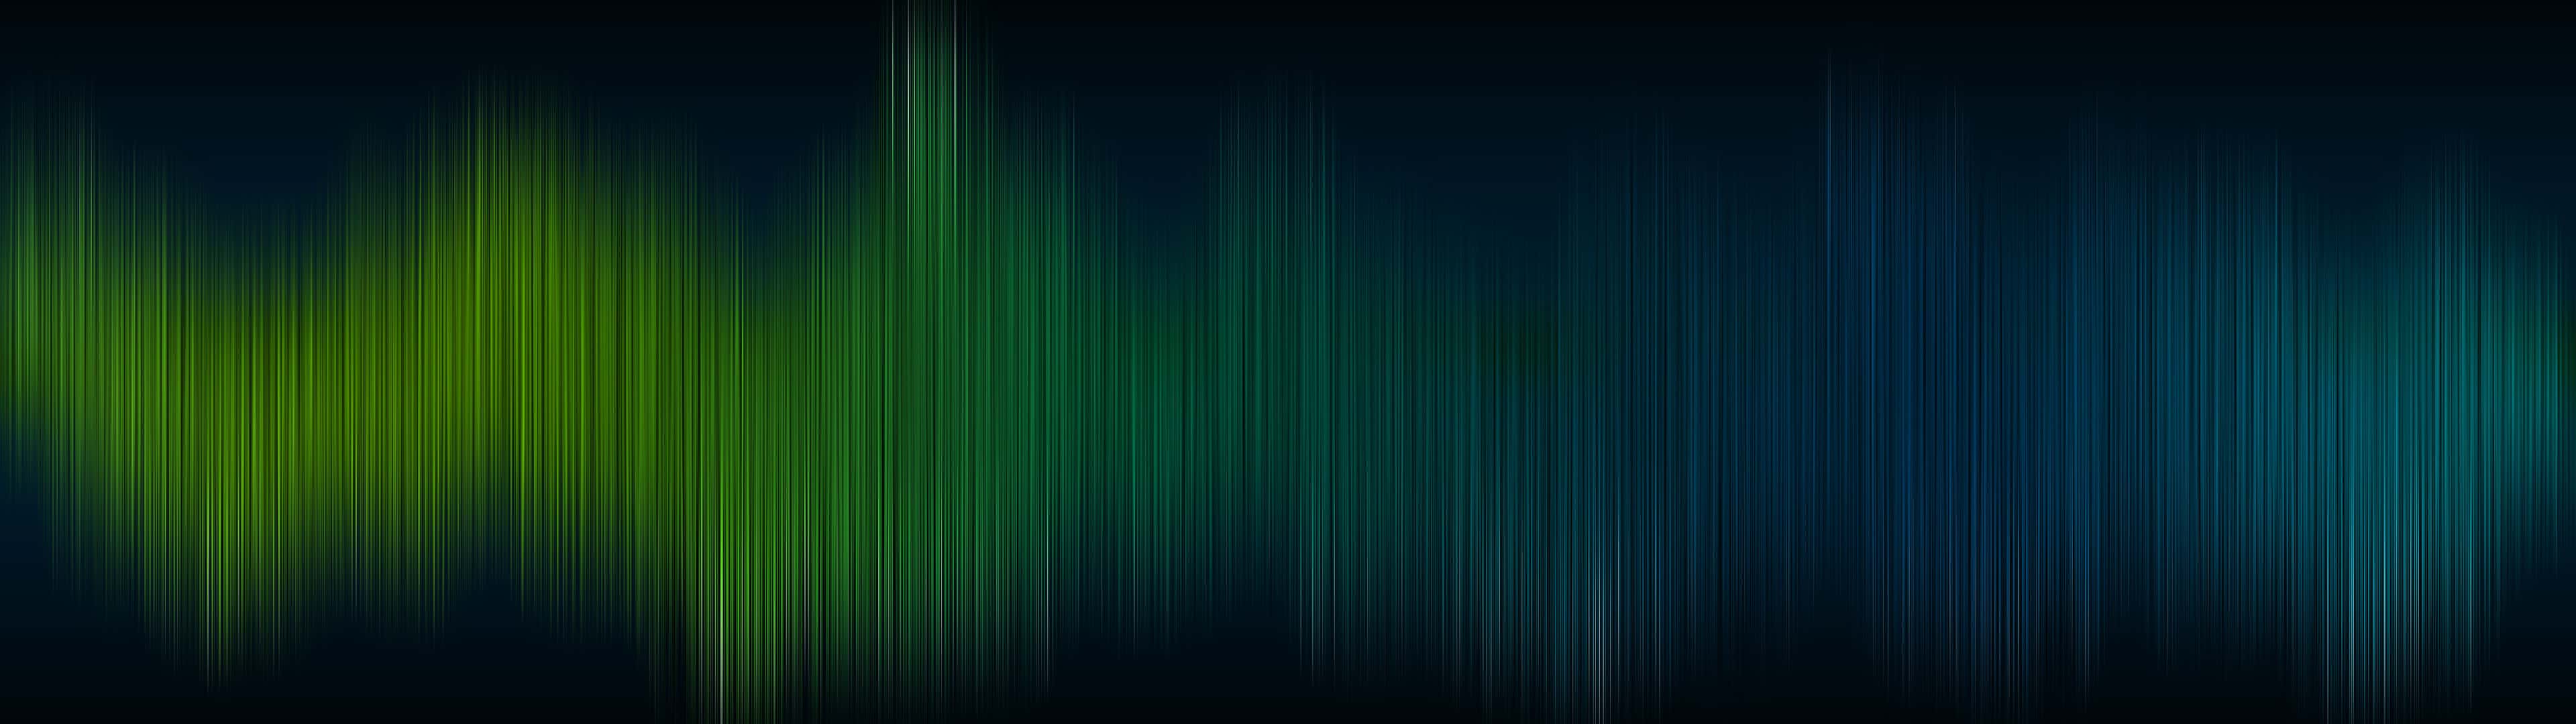 Line Pattern Green And Blue Dual Monitor Wallpaper Black